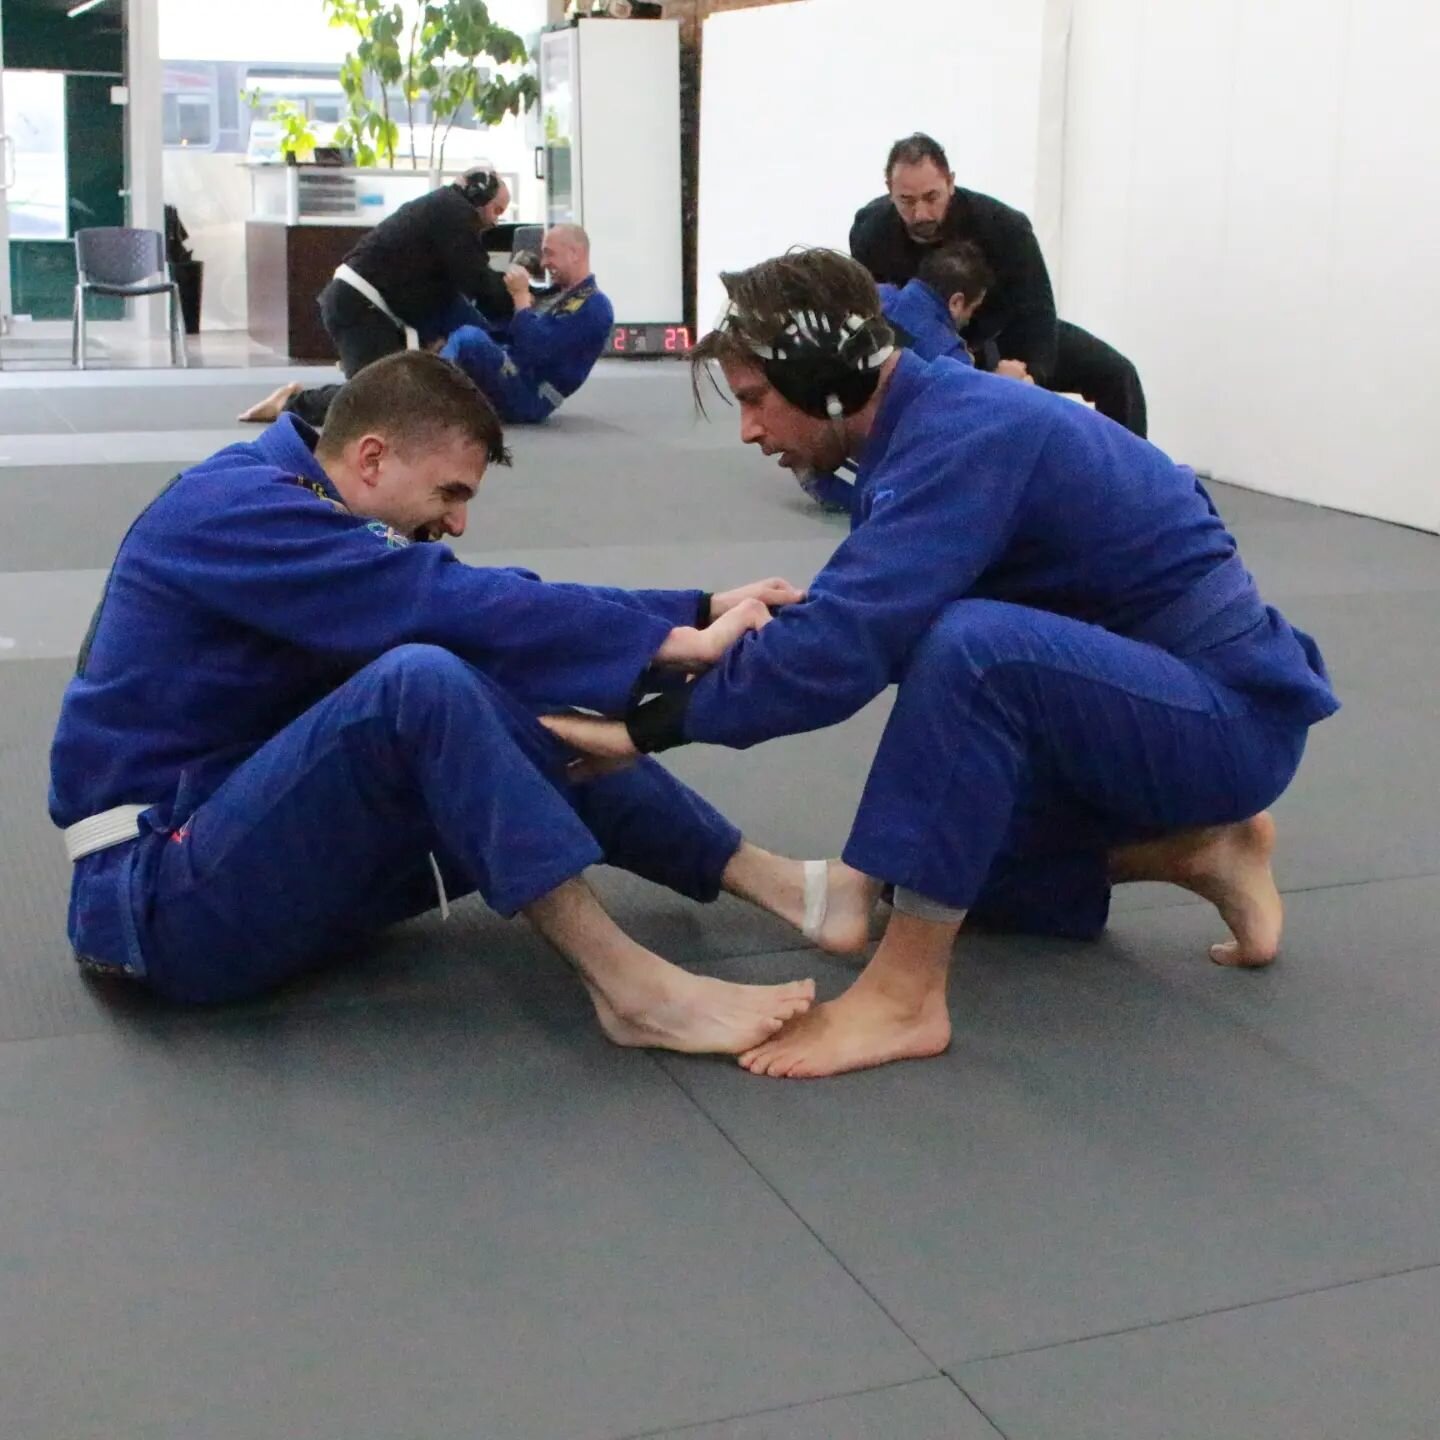 The feeling you get leaving the Jiu-Jitsu class is always better than if you would have skipped. 
Finding two to three hours a week to be in an environment like ours is crucial.
See you on the mats!

Park Slope Academy of Brazilian Jiu-Jitsu 
518 5th